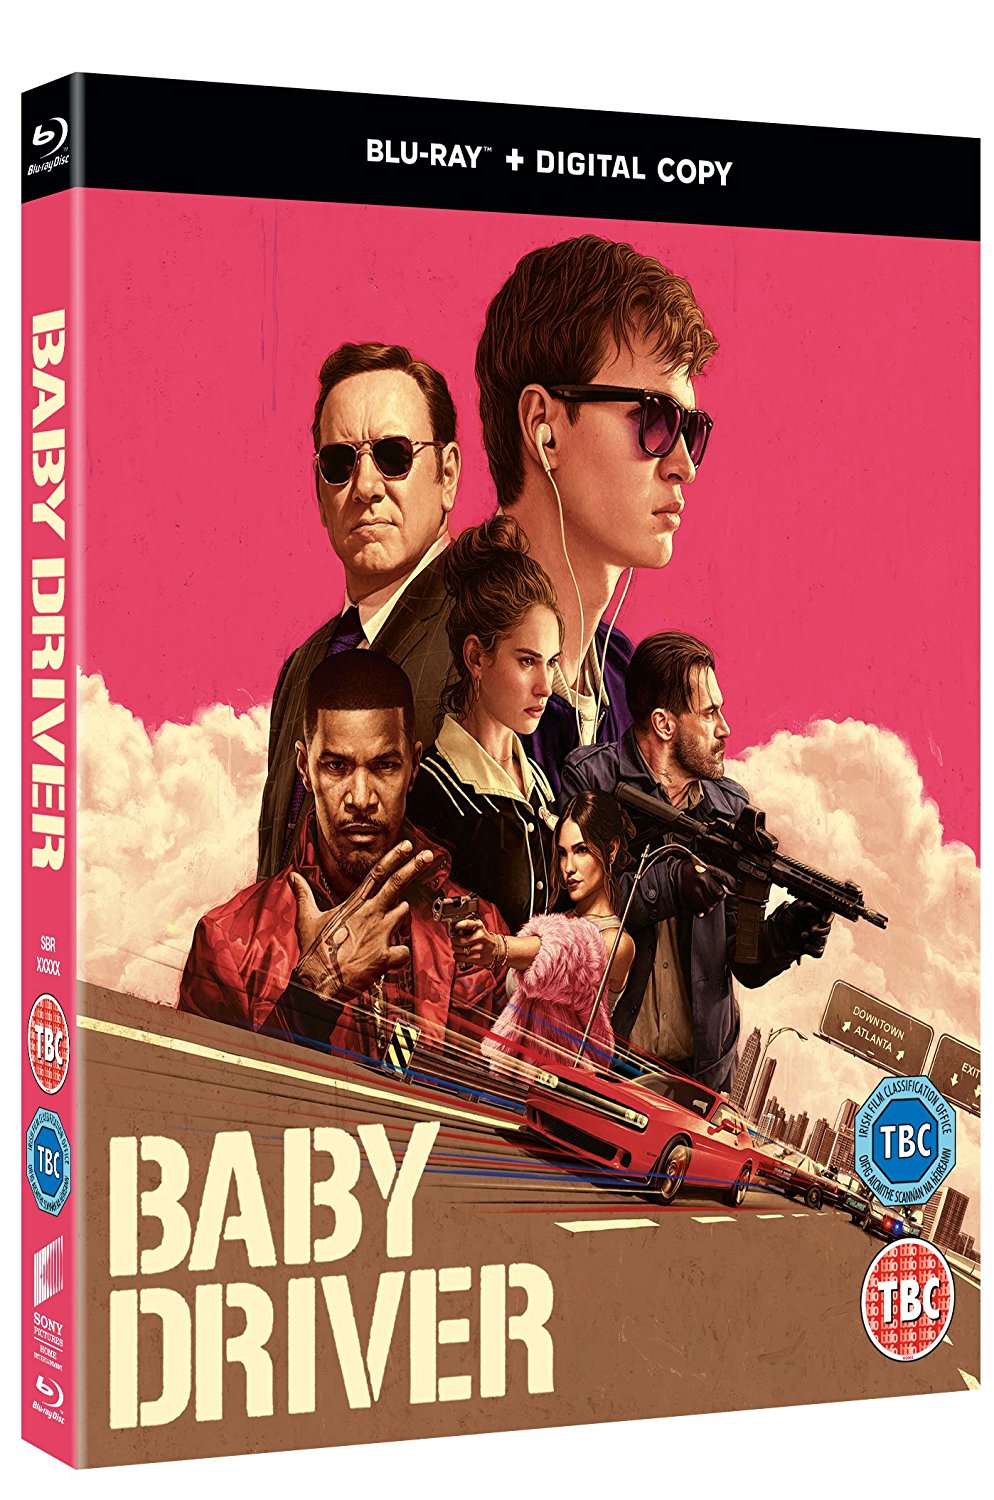 baby driver soundtrack mike mires song